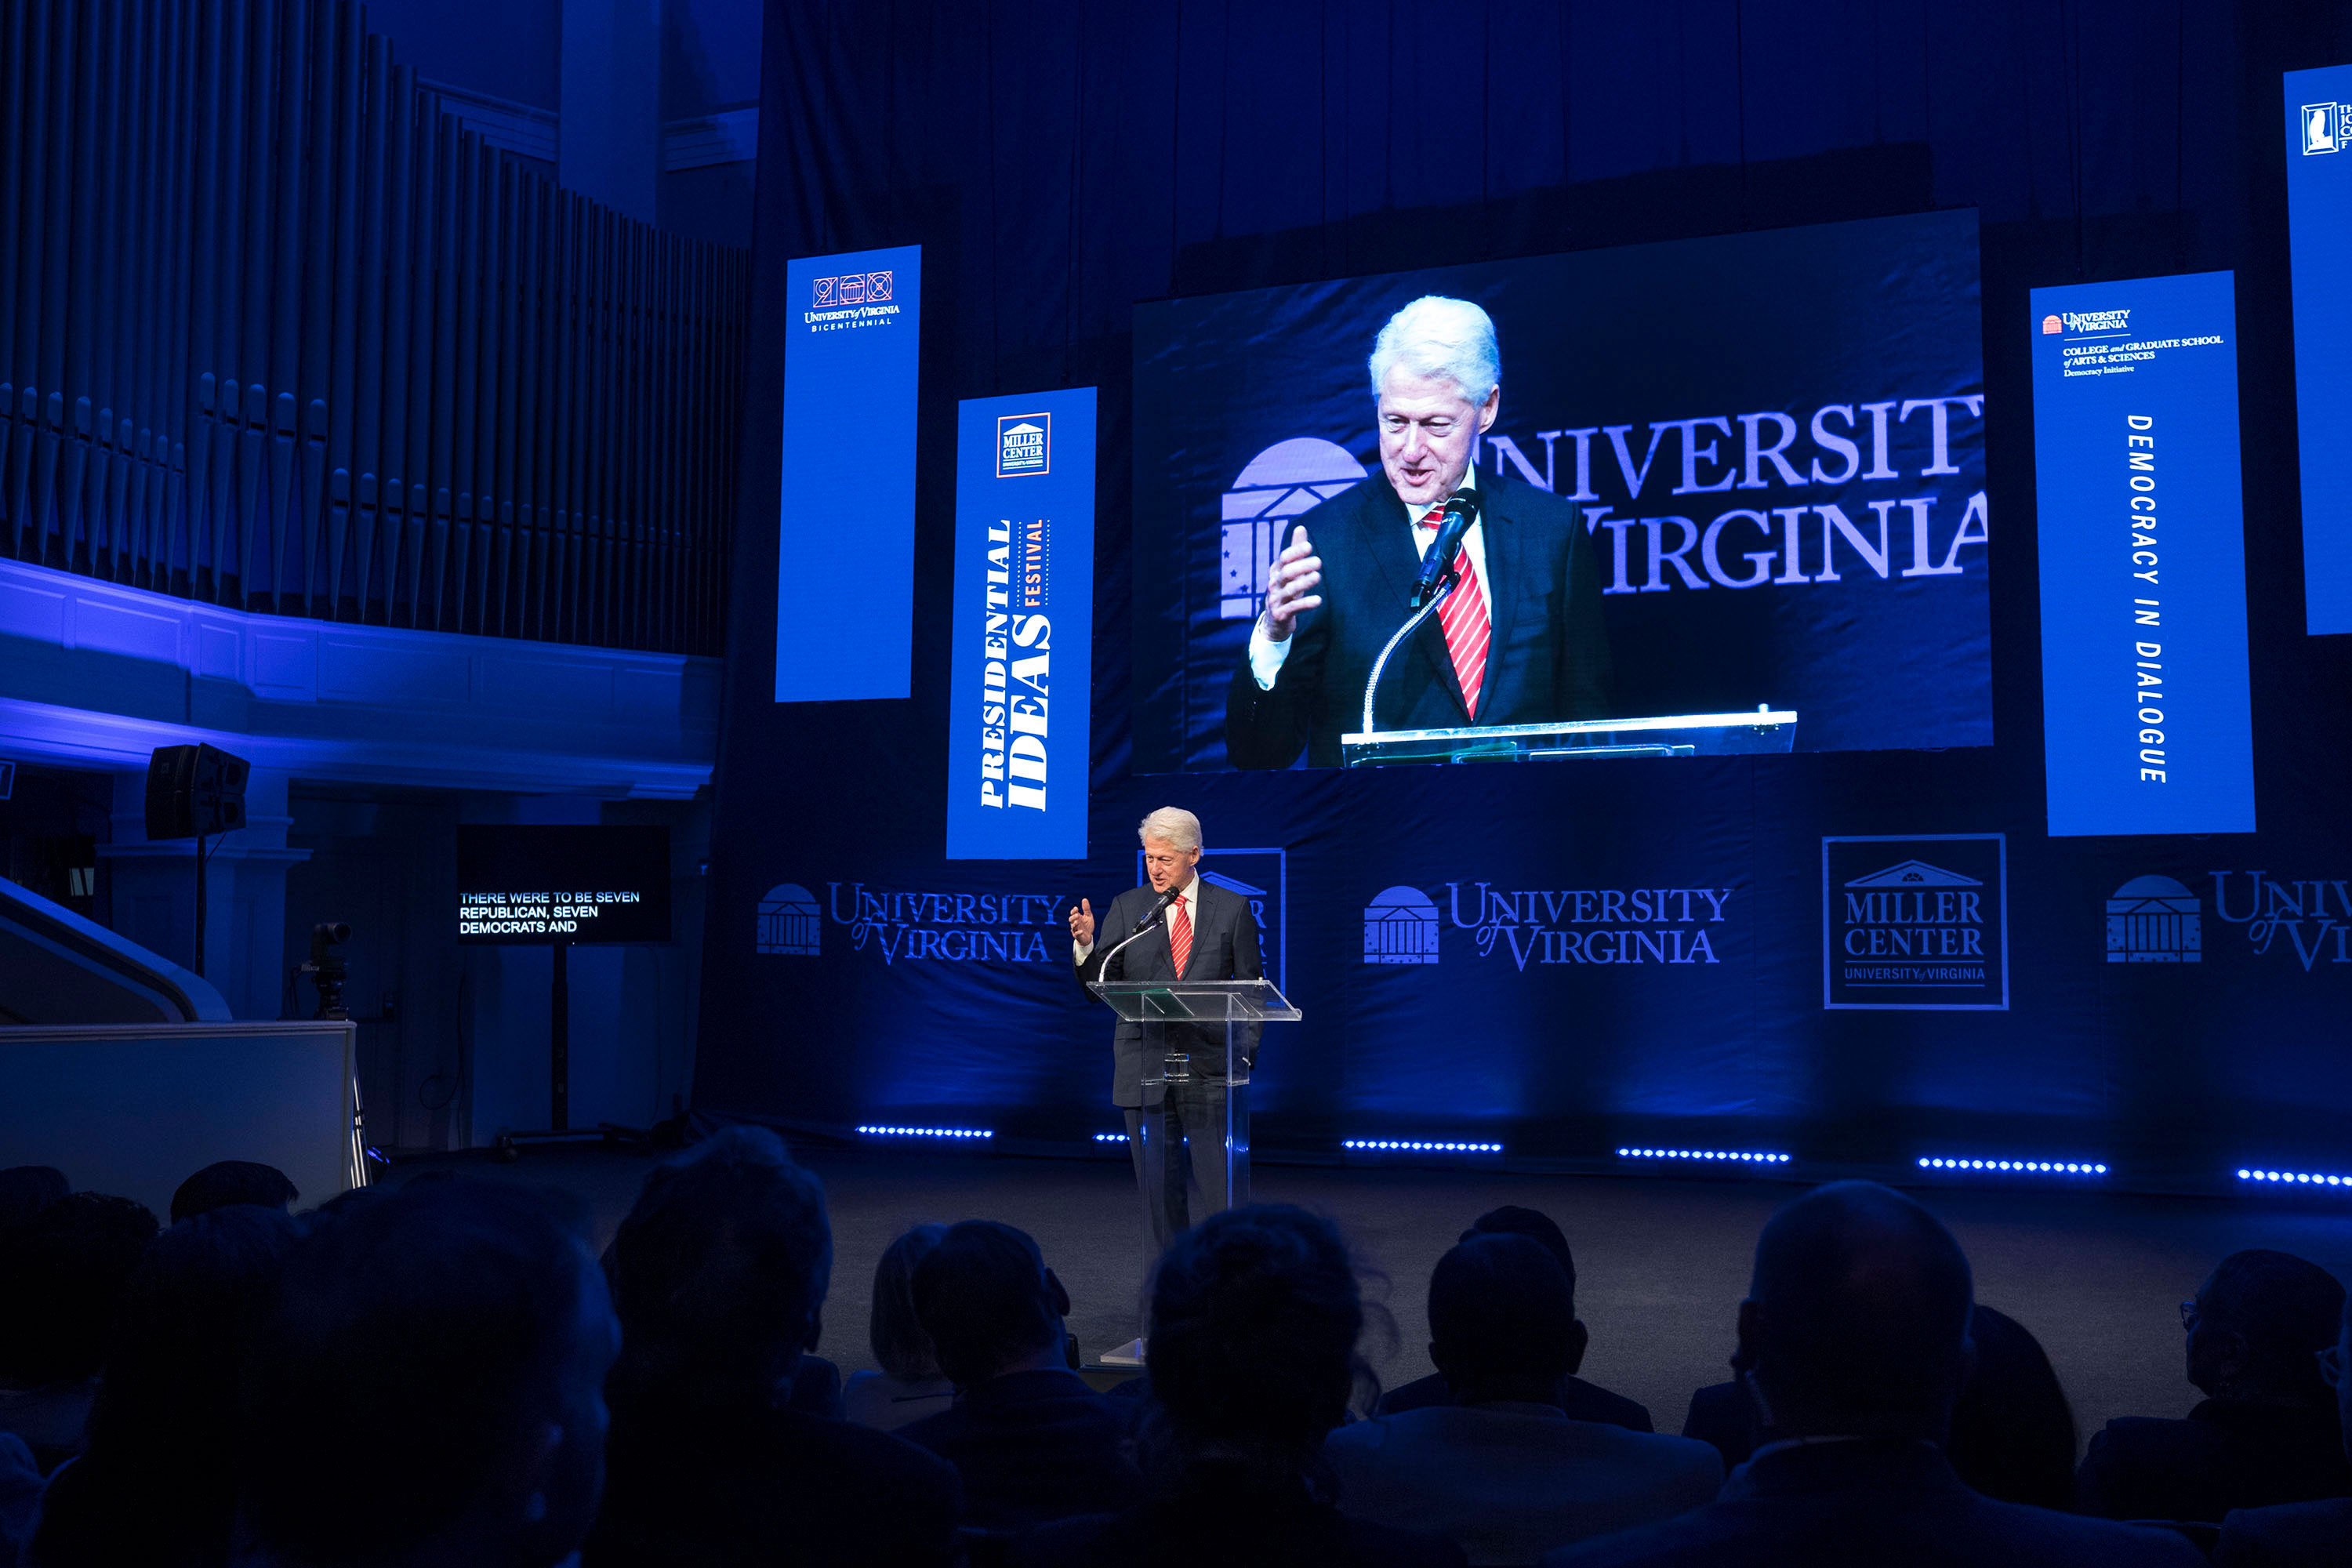 Former President Bill Clinton stands at a podium talking